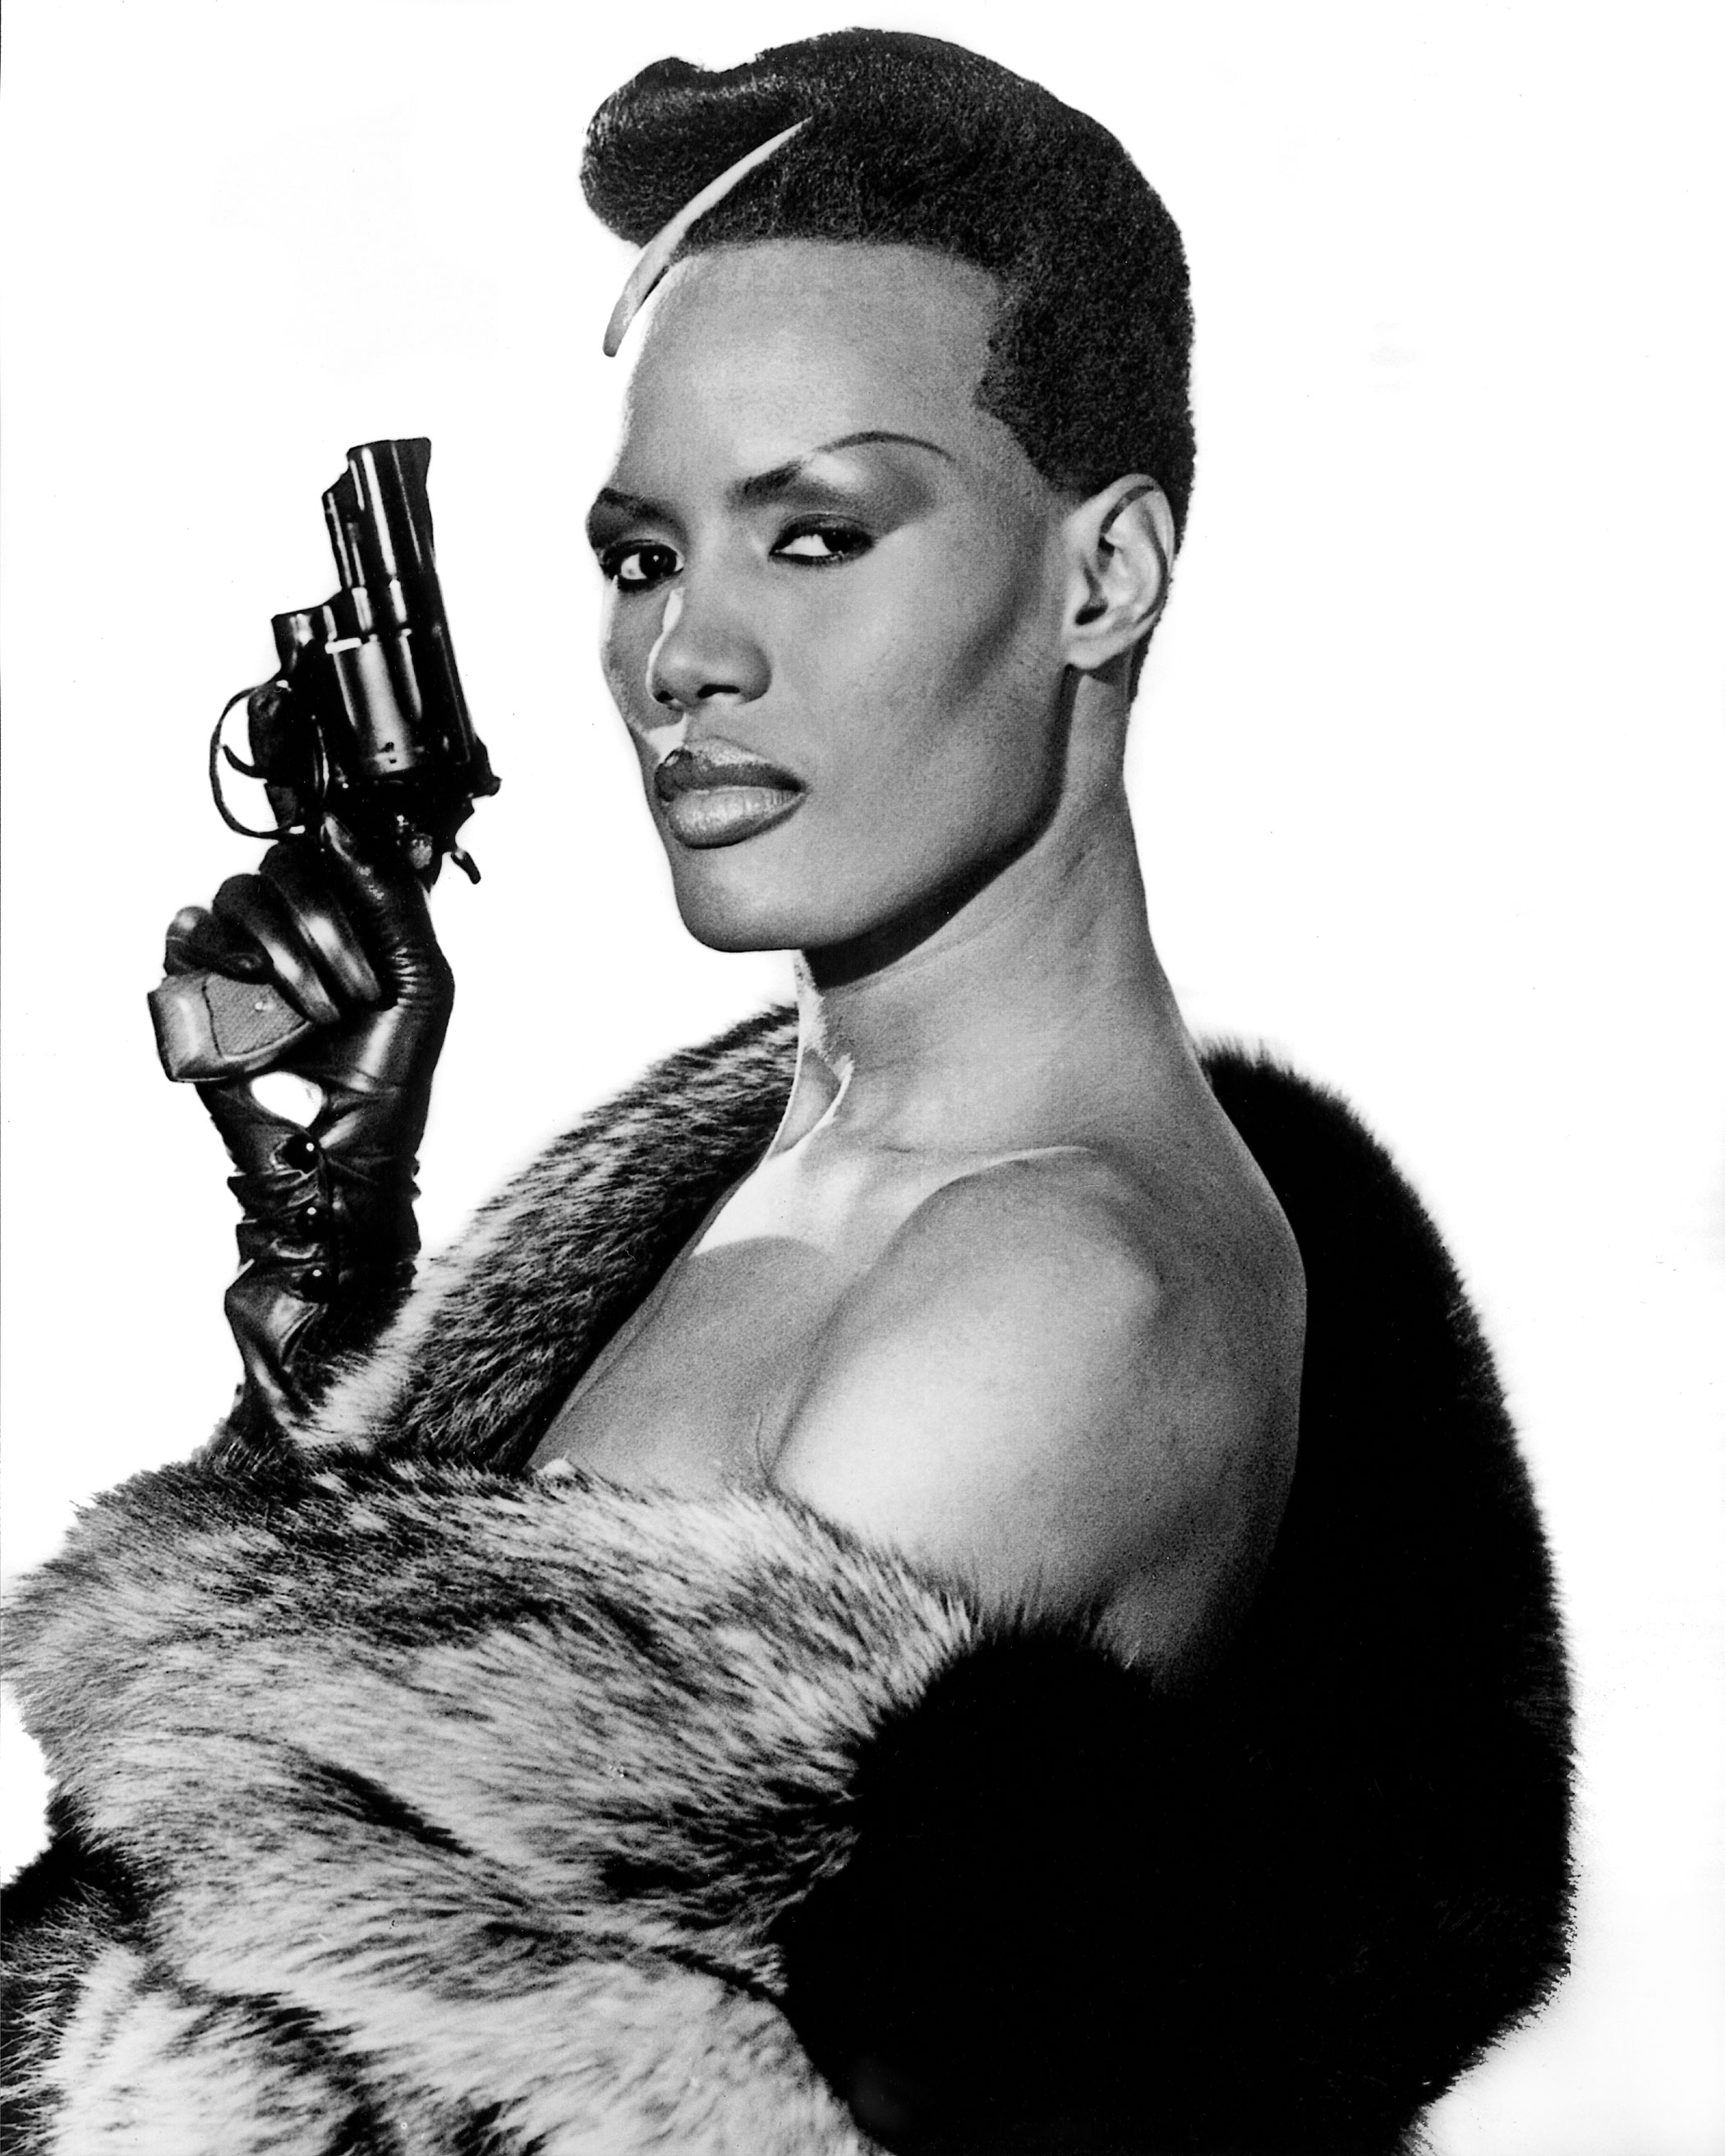 May Day (Grace Jones)
                              A View to a Kill, 1985
                              The film had some serious sexism issues, but it's redeemed by Grace Jones' performance. Chief of an all-female group of body guards, villain-turned-hero May Fay has super human strength. At one point she easily lifts a man over her head.